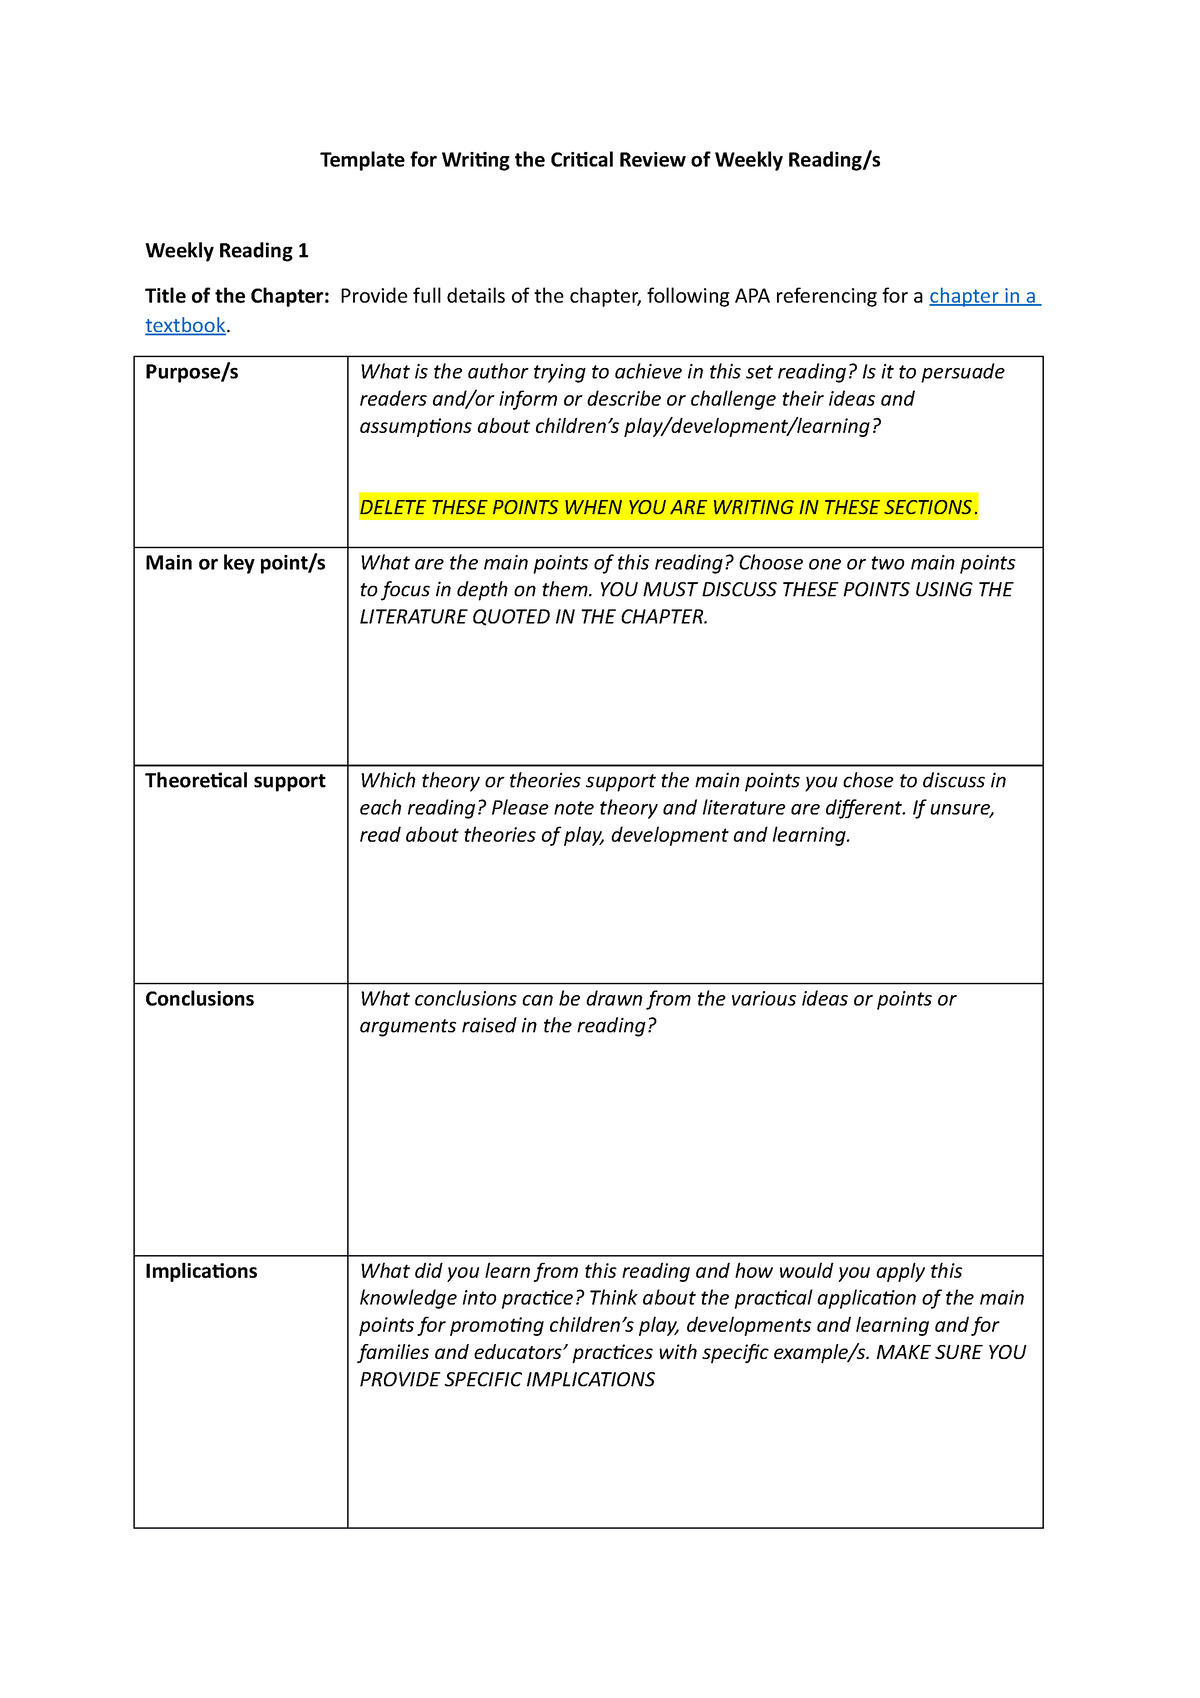 template-for-writing-critical-review-template-for-writing-the